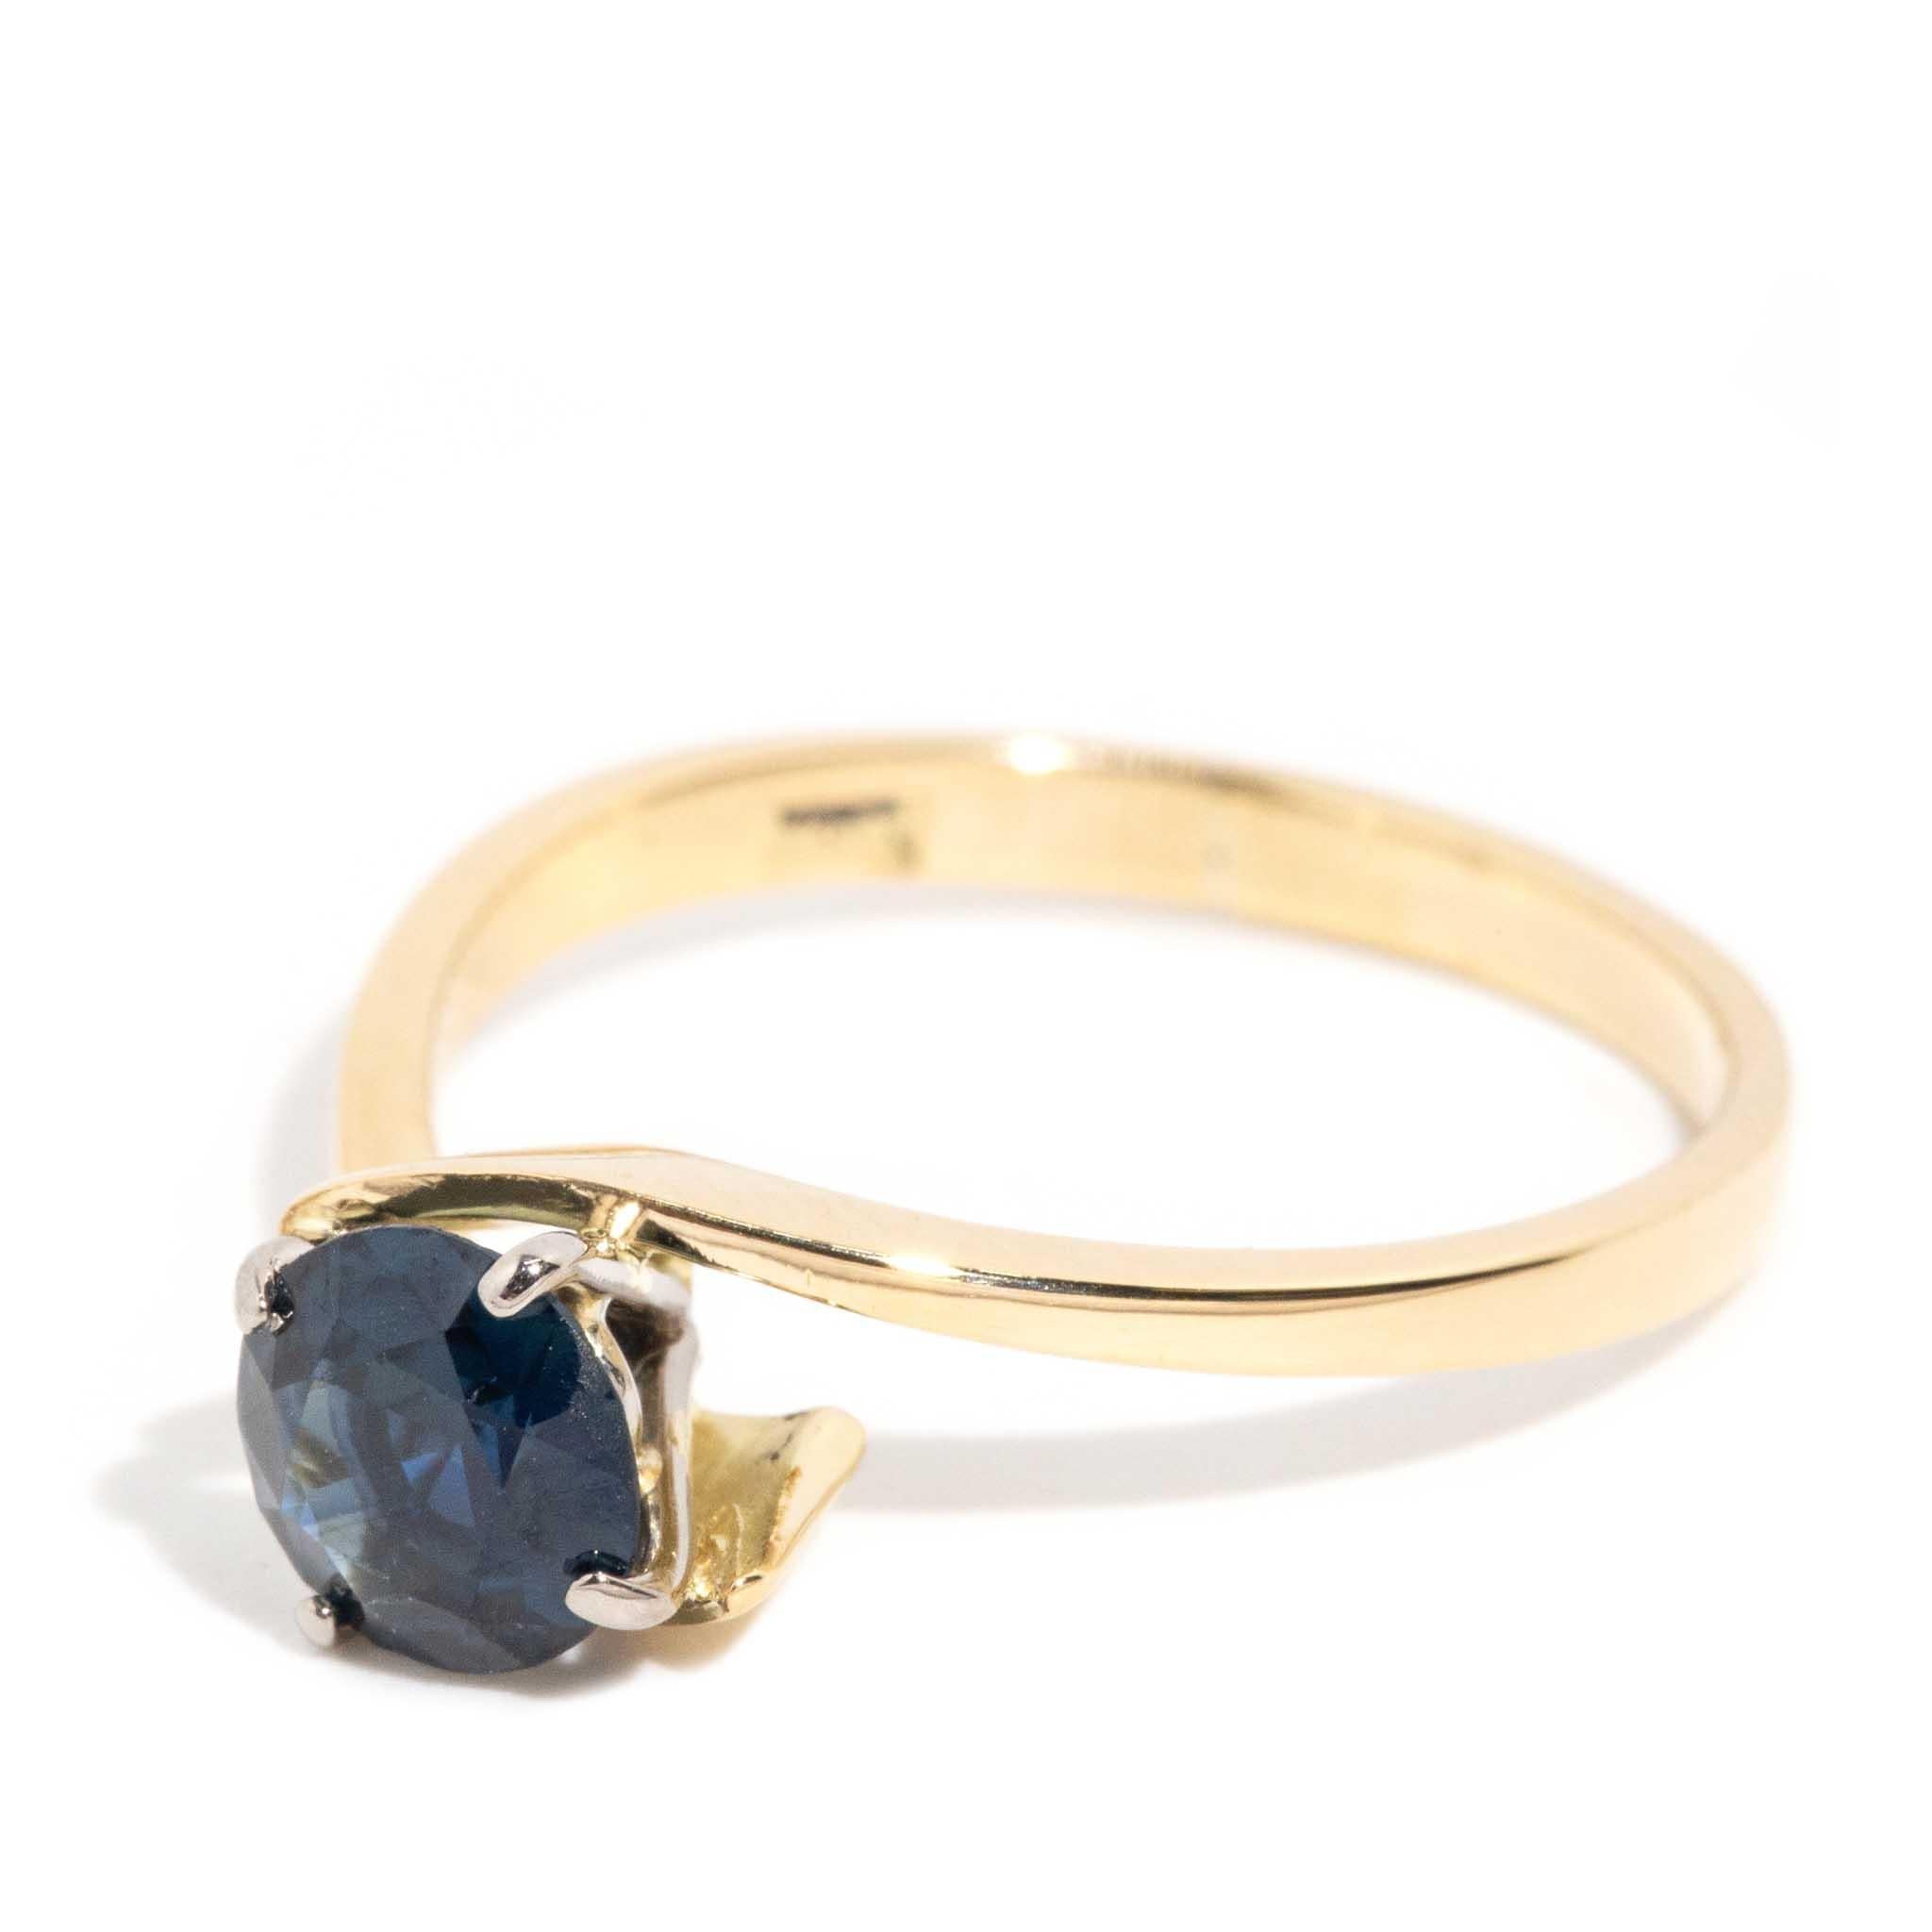 Vintage Circa 1980s 0.90 Carat Deep Blue Sapphire Ring 18 Carat Yellow Gold In Good Condition For Sale In Hamilton, AU